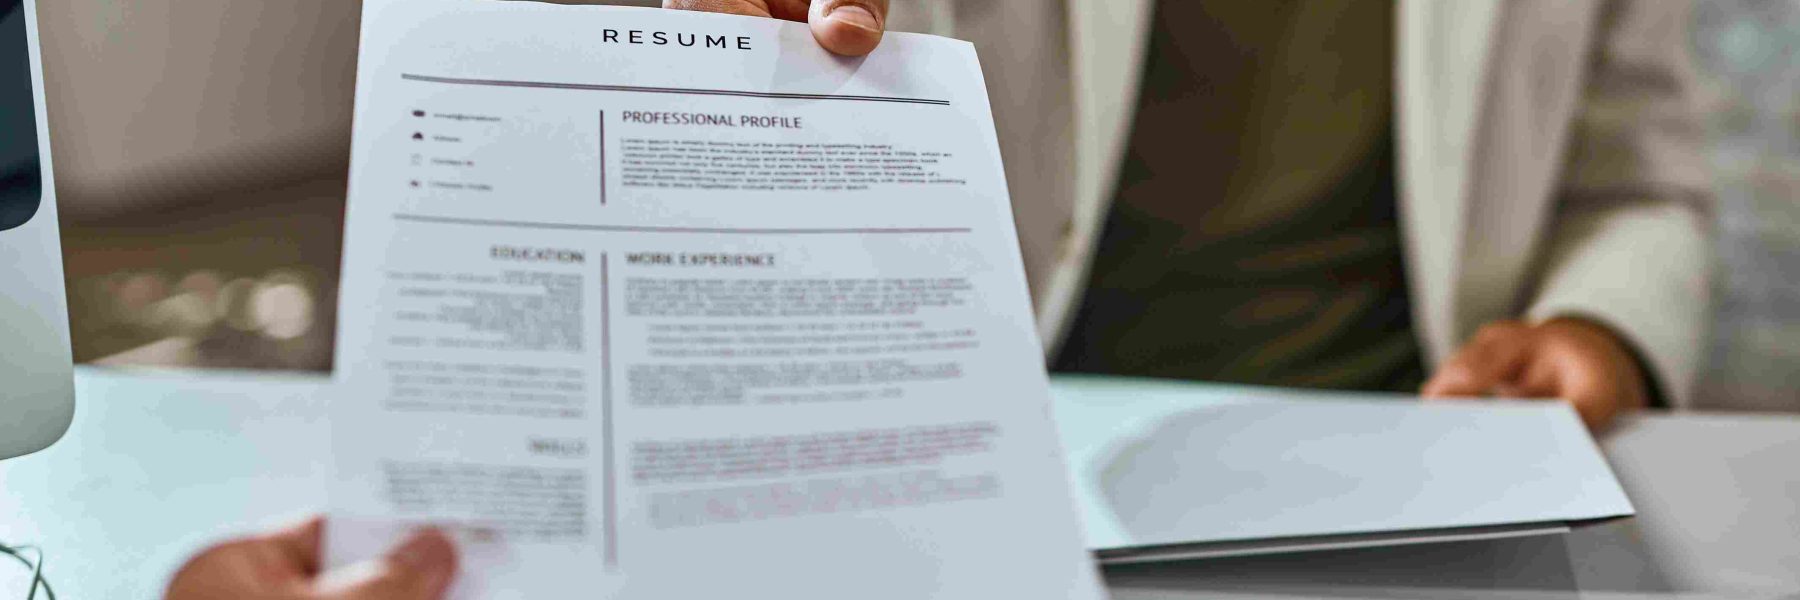 8 Mistakes That Make Your CV Look Unprofessional